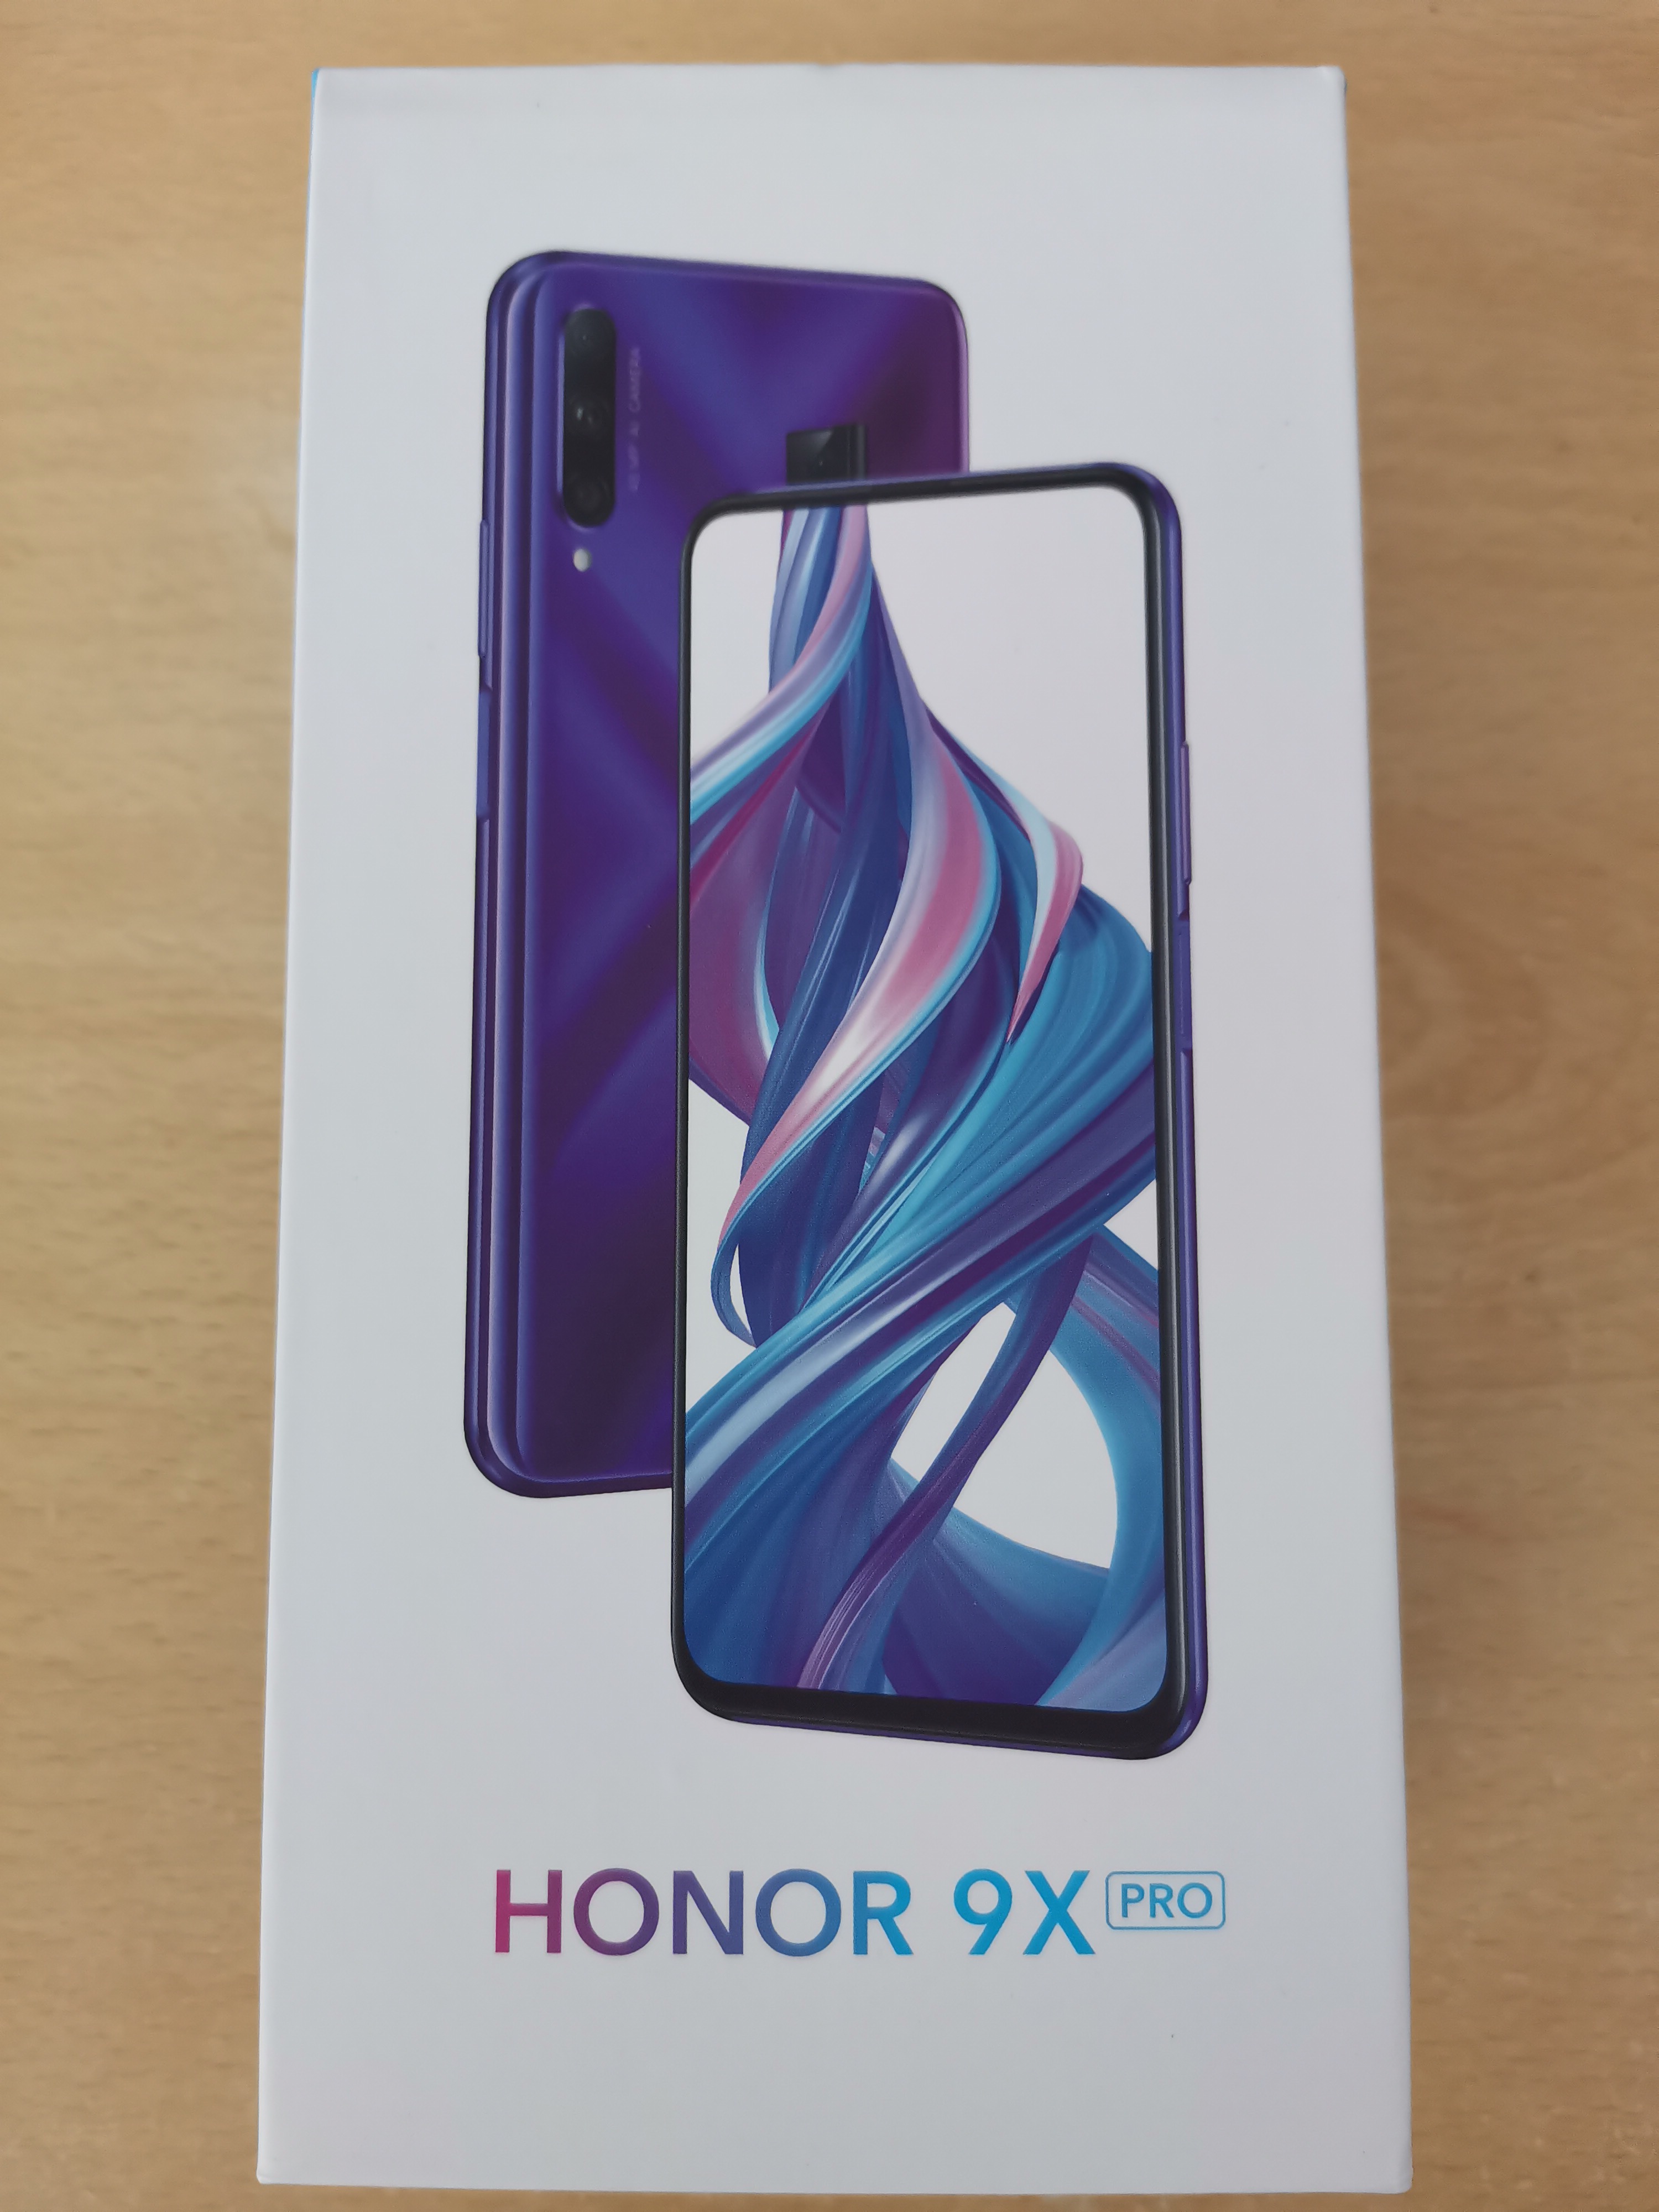 Share Asphalt 9 Experience to Win HONOR 9X PRO